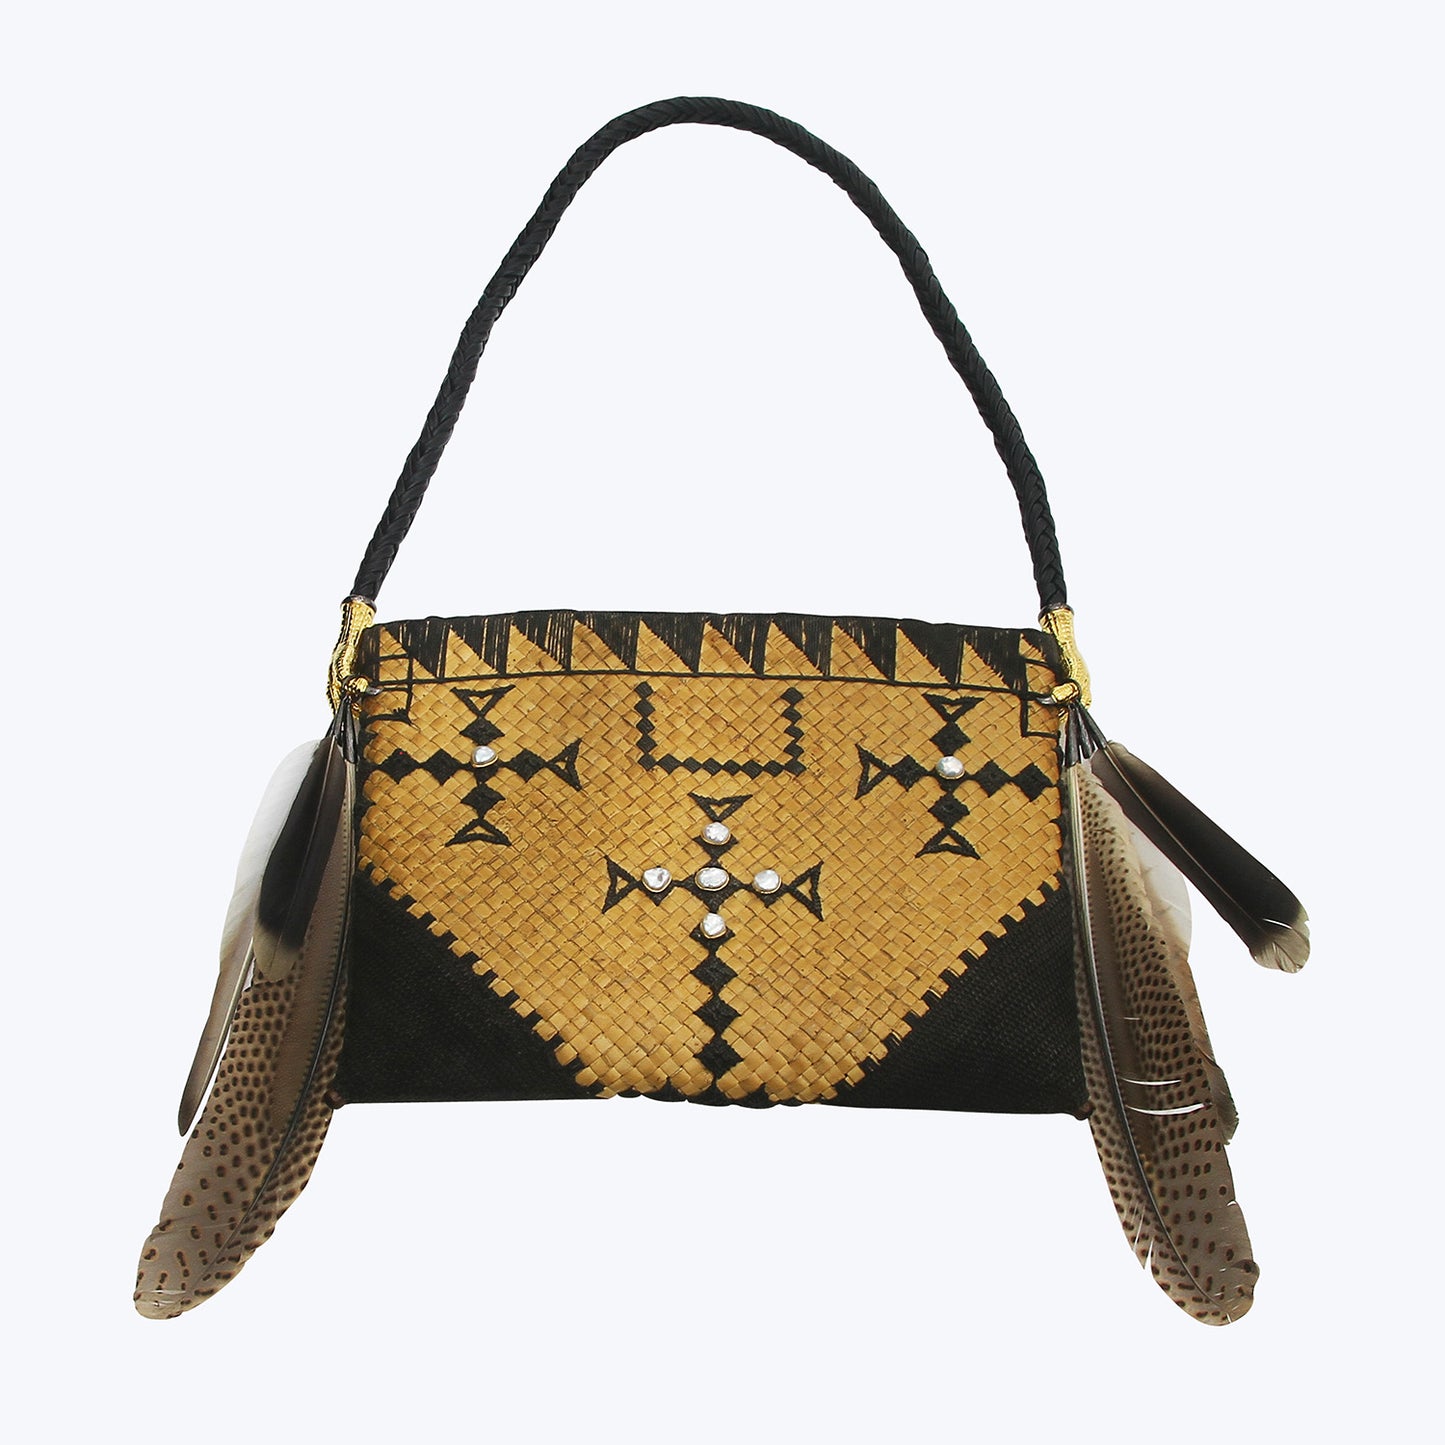 Indonesian Tribal Woven Handbag with Pearl and Feather